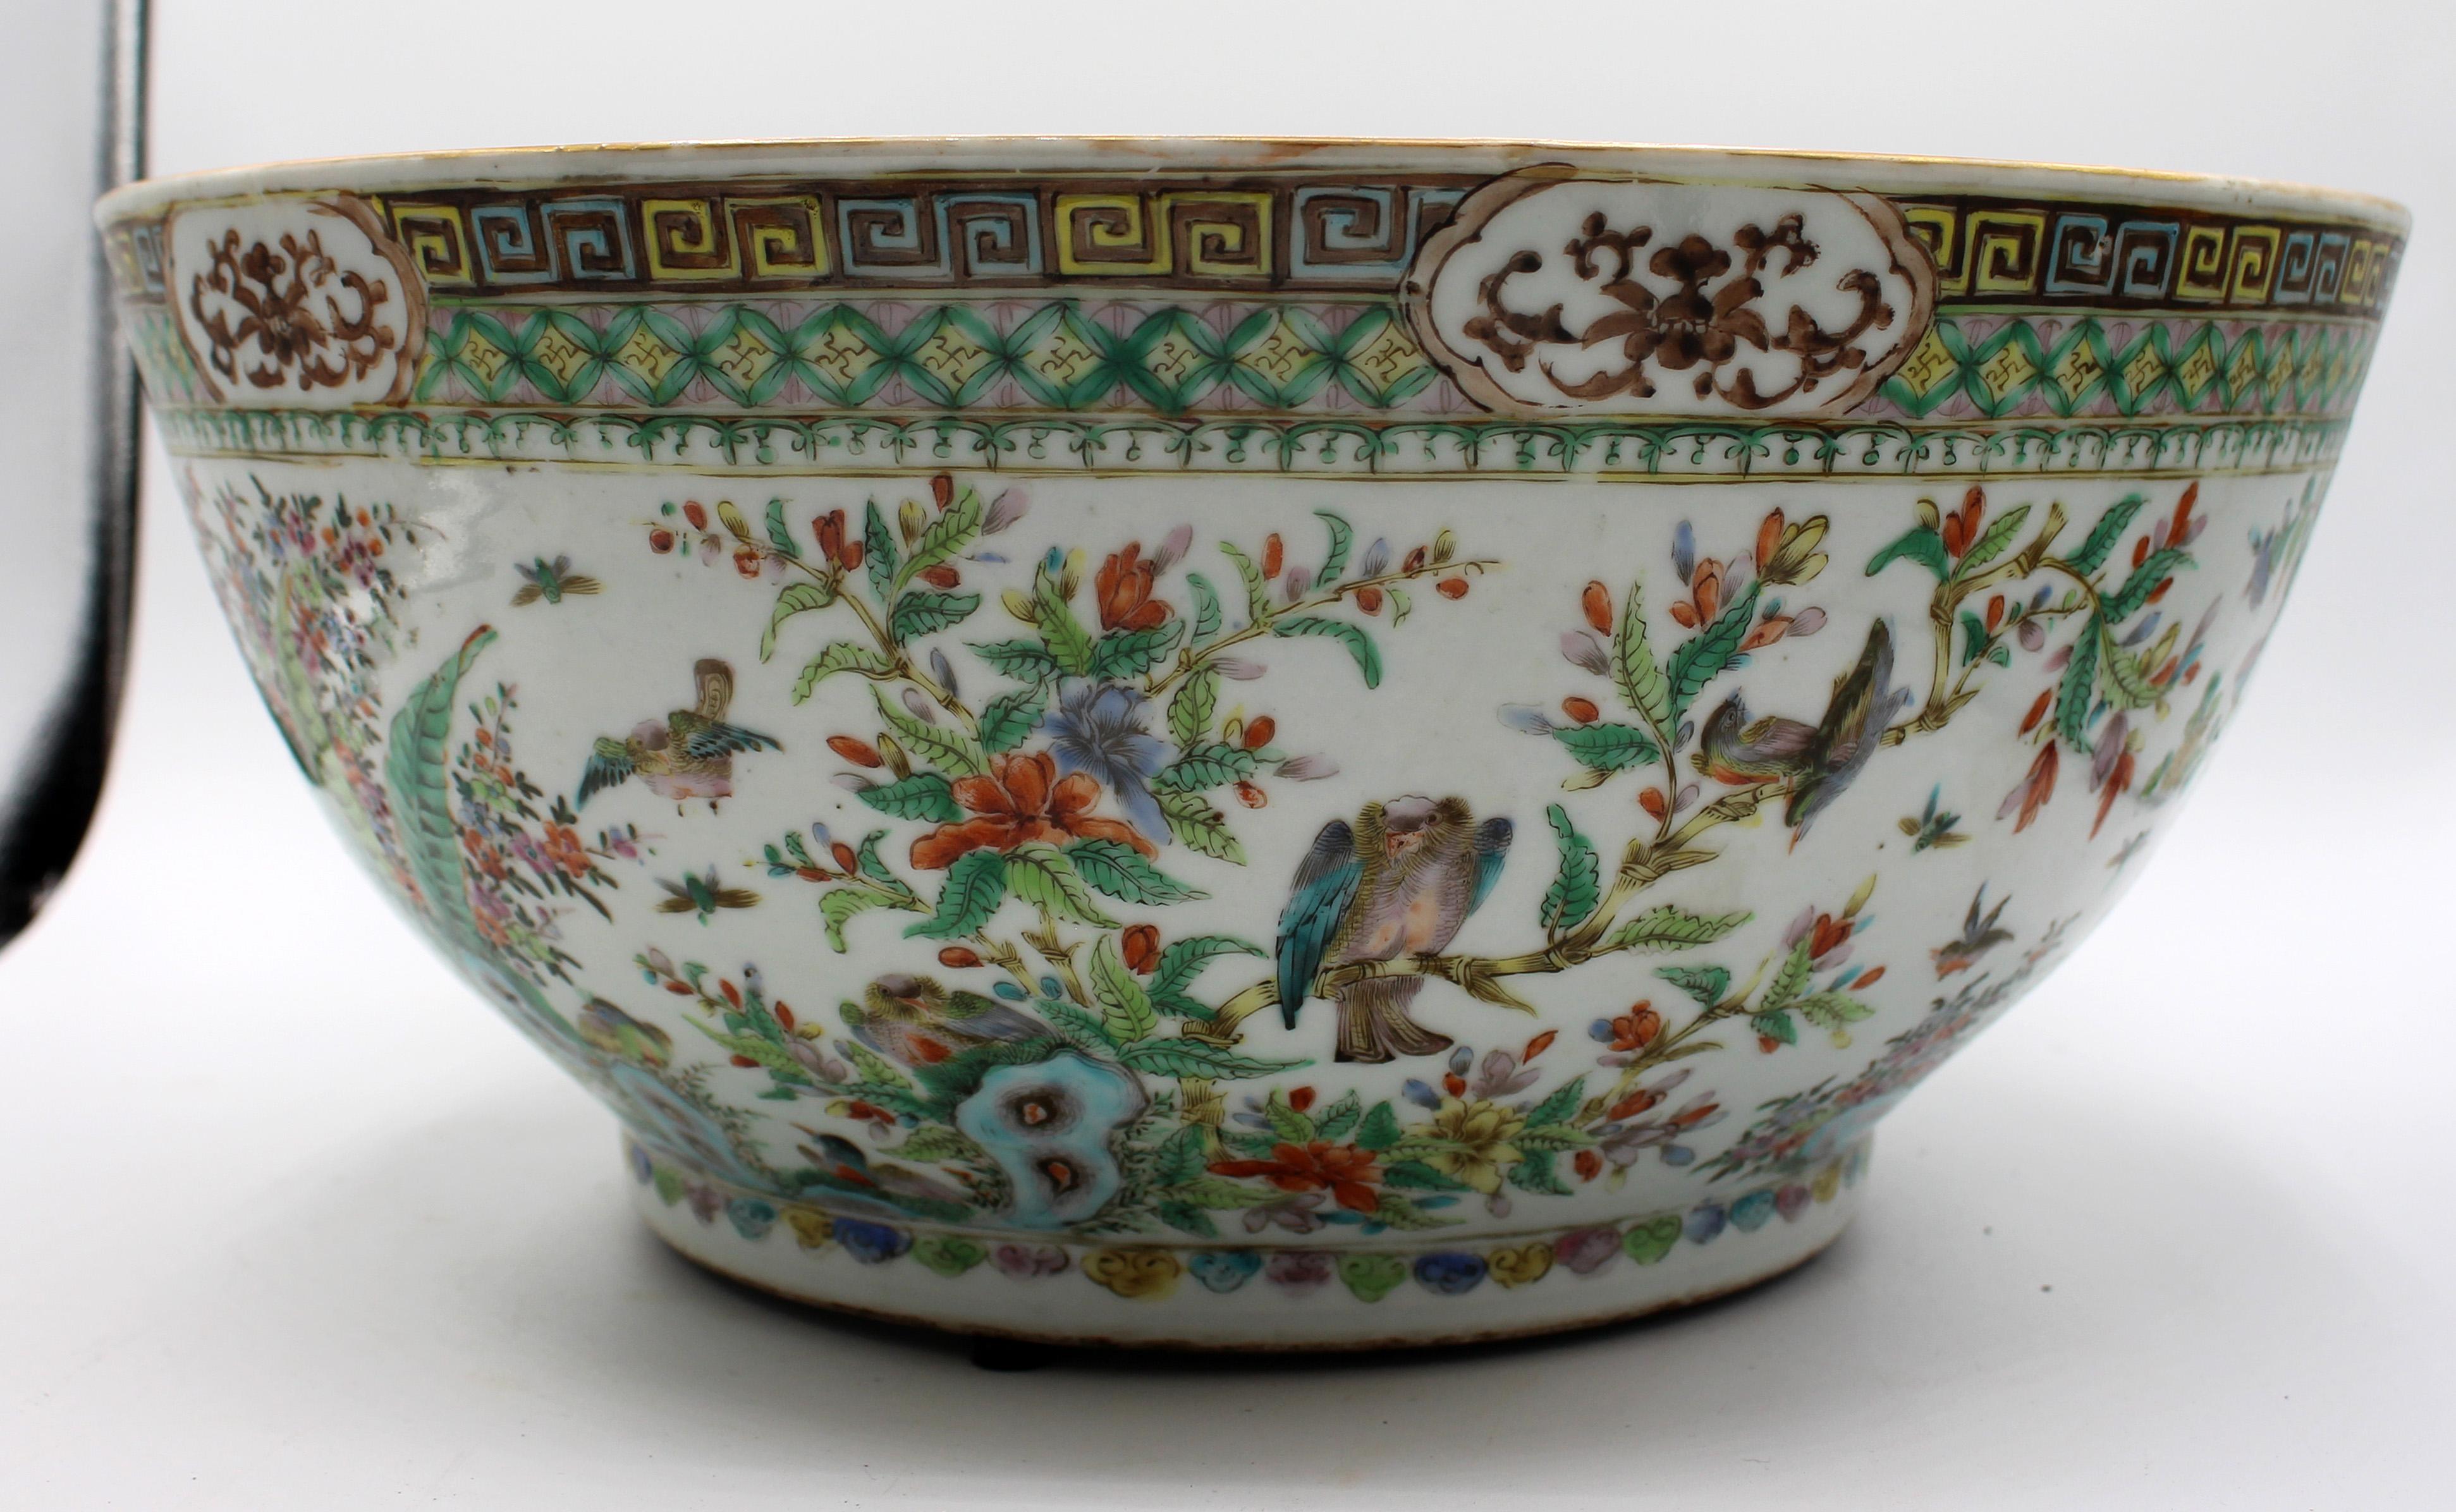 Chinese Export Porcelain Famille Verte Punch Bowl, circa 1860, Qing Dynasty. A marvelous, rare design ornithological motif. Greek key outer borders define large panels of birds wading, flying & in tree branches. A few glaze pops & rubbed spots